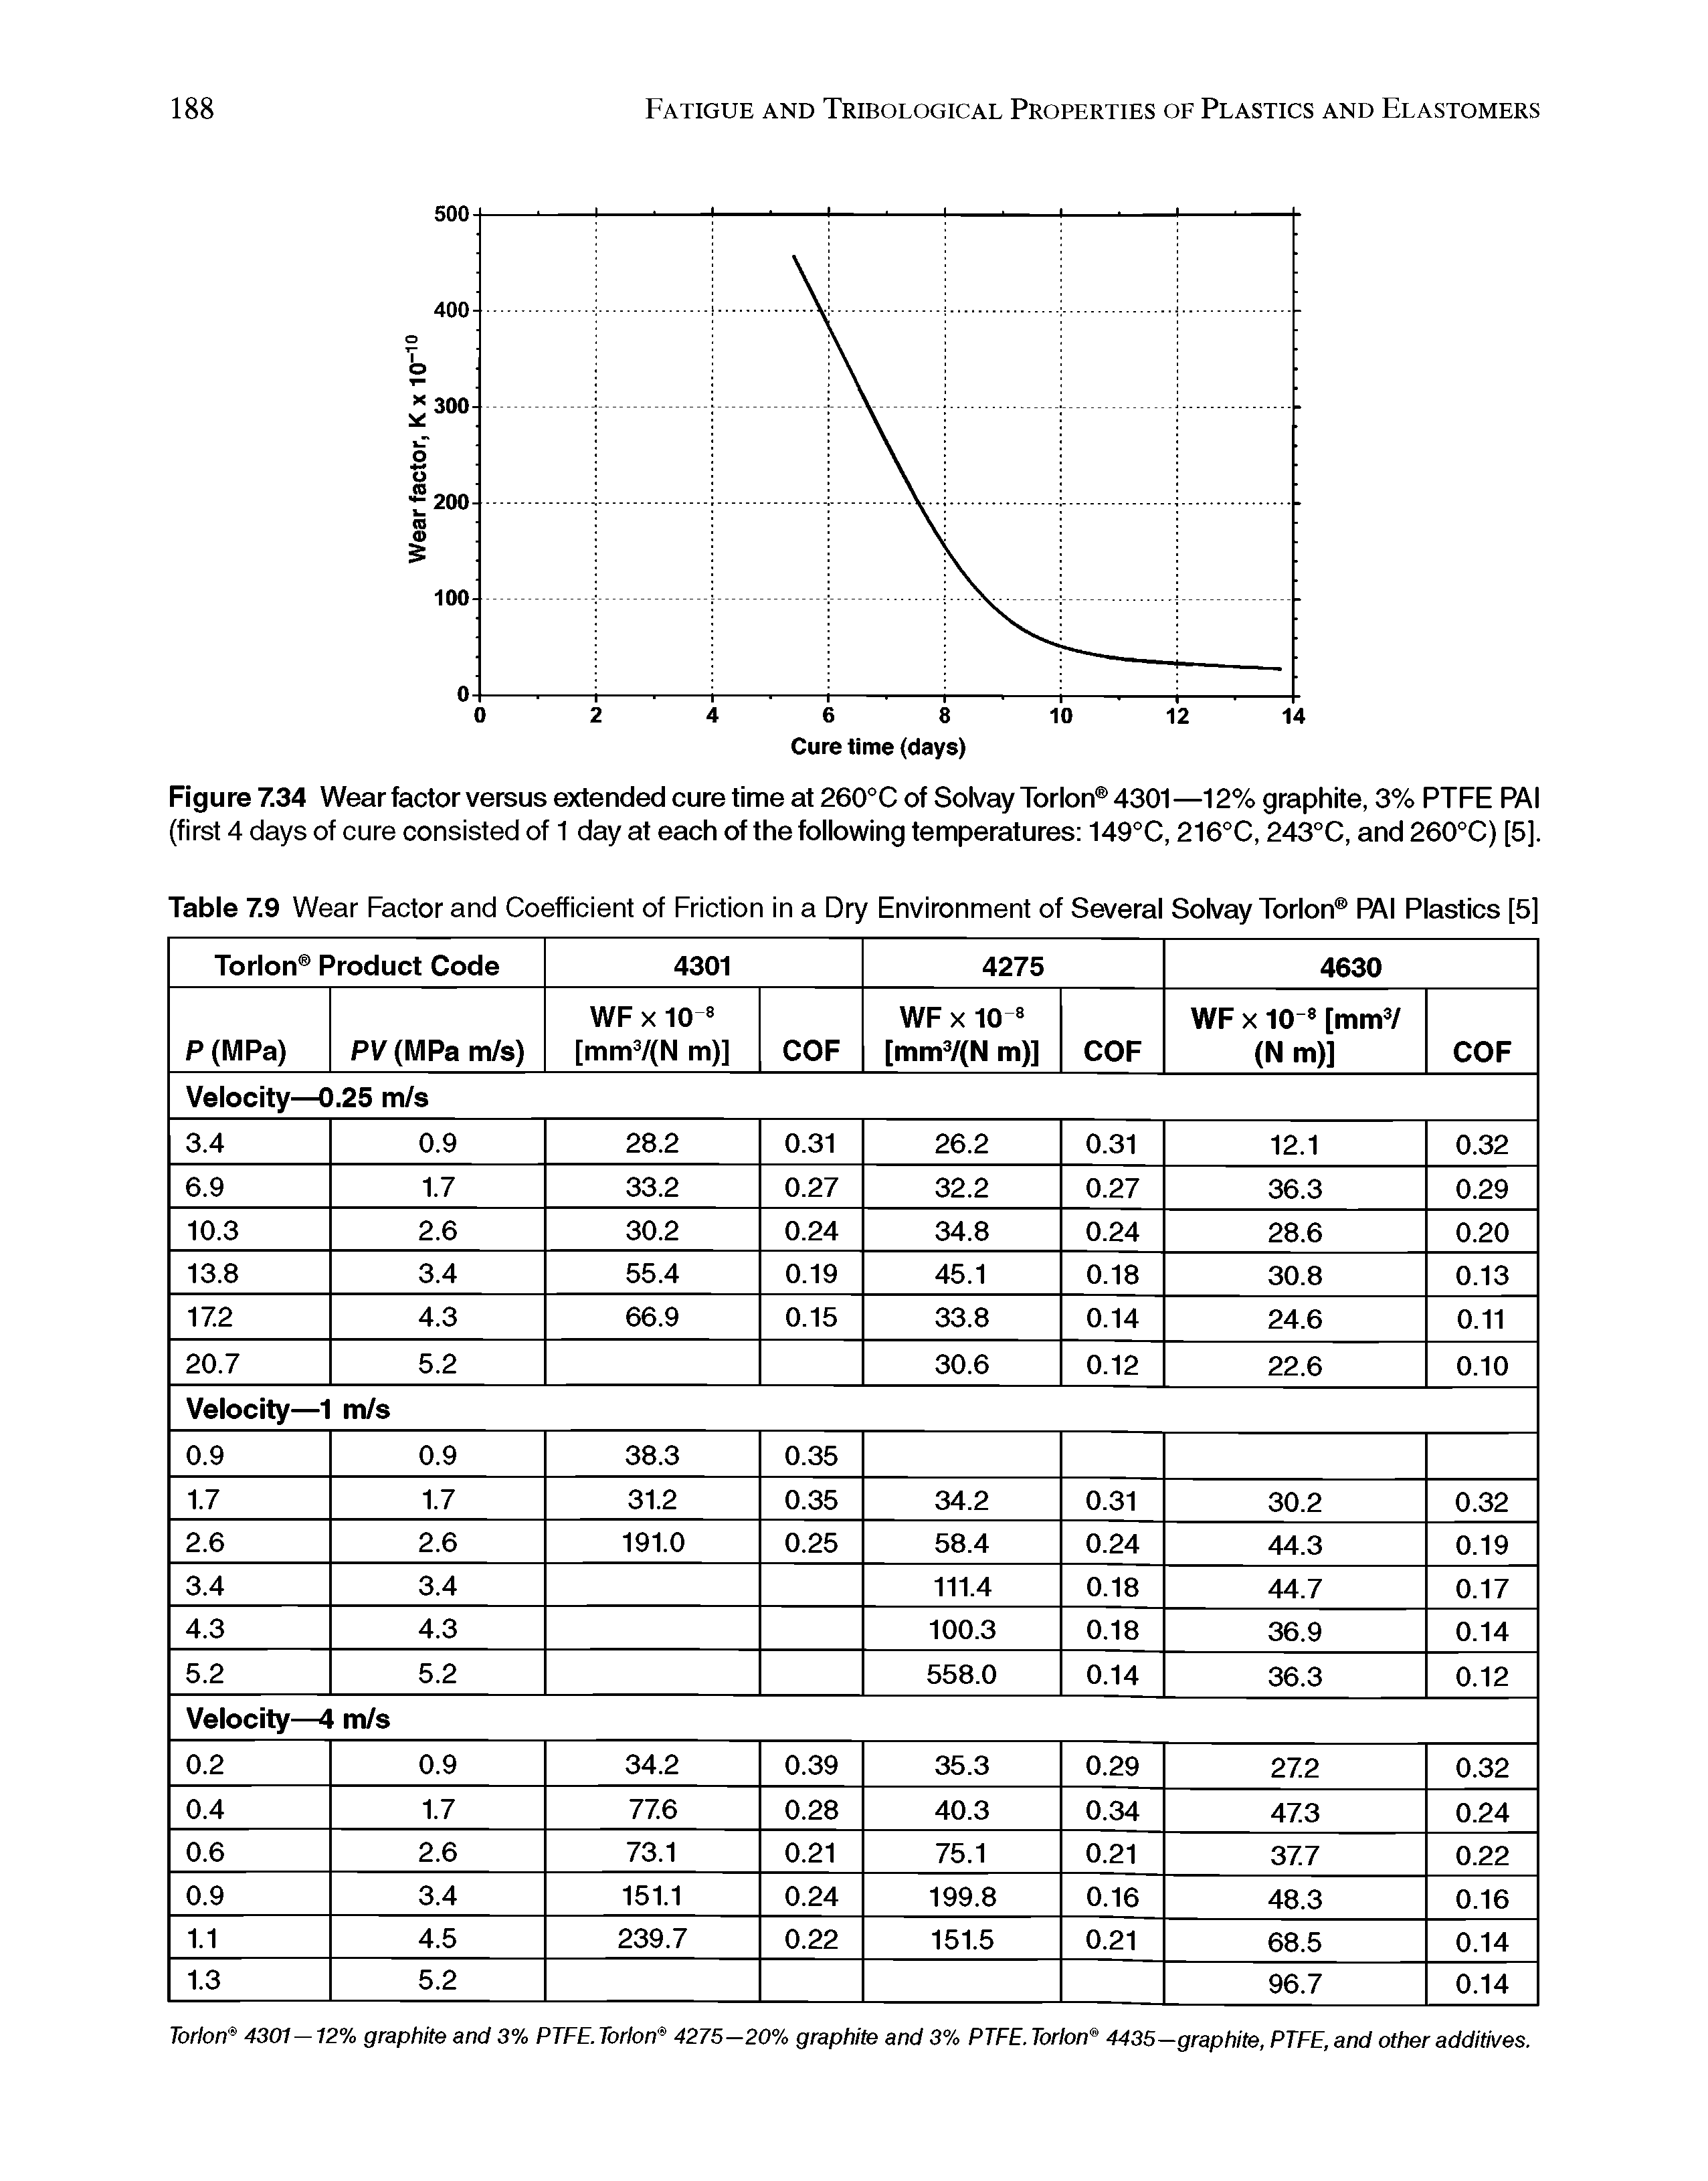 Table 7.9 Wear Factor and Coefficient of Friction in a Dry Environment of Several Solvay Torlon PAI Plastics [5]...